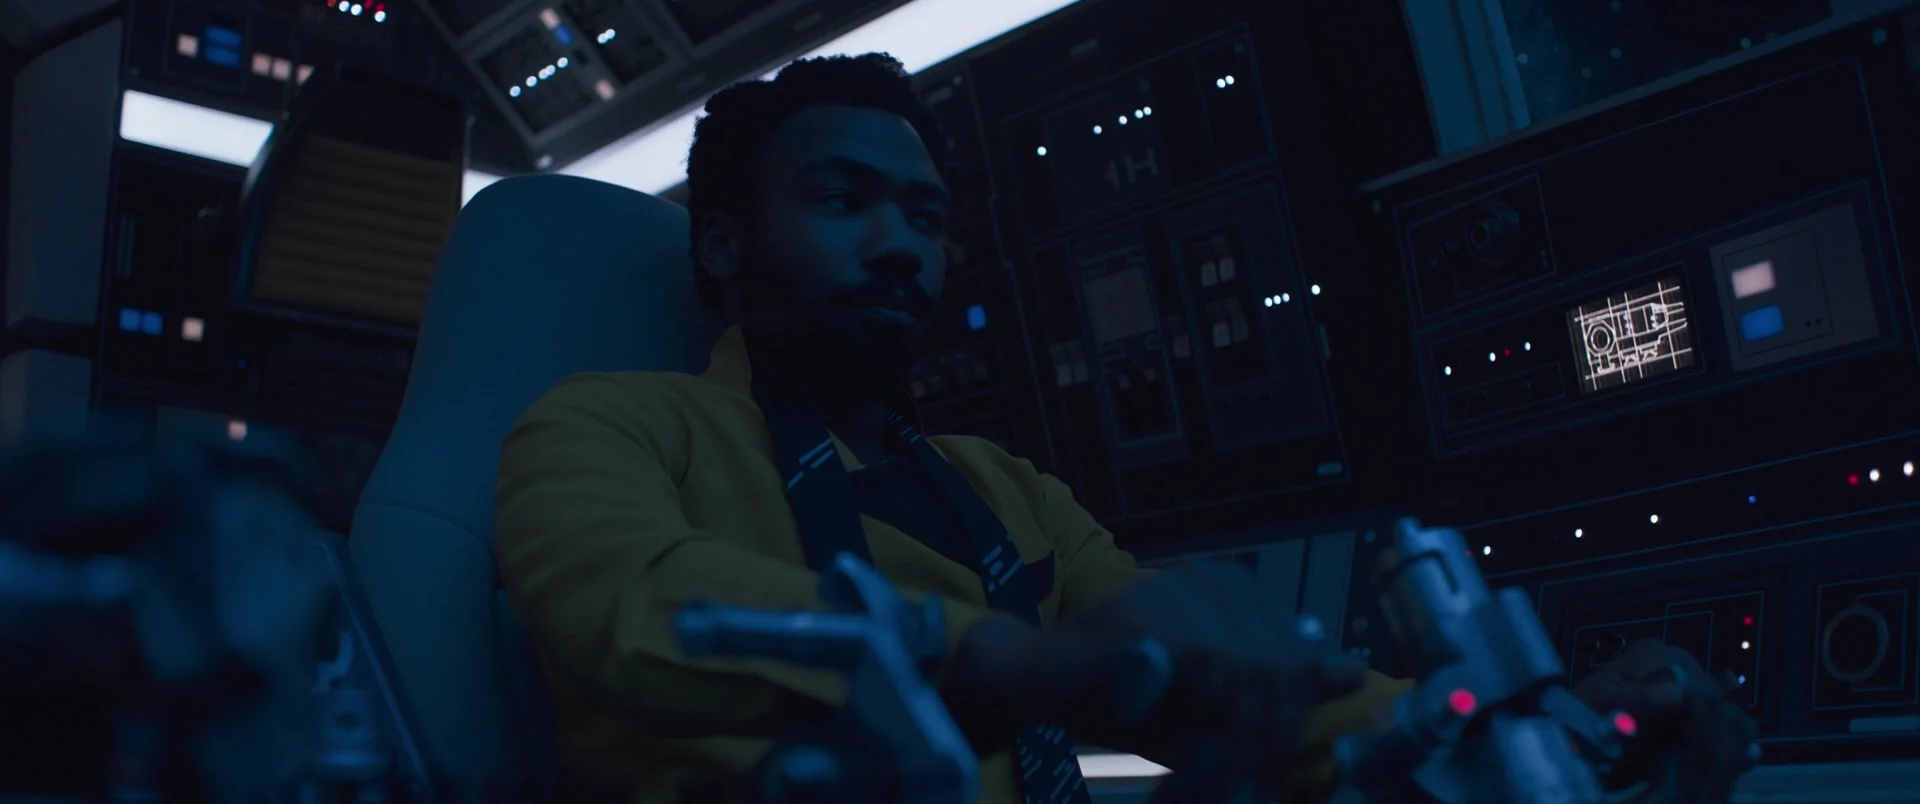 Lando Calrissian (Donald Glover) gets behind the controls of the Millenium Falcon in Solo: A Star Wars Story (2018), Lucasfilm